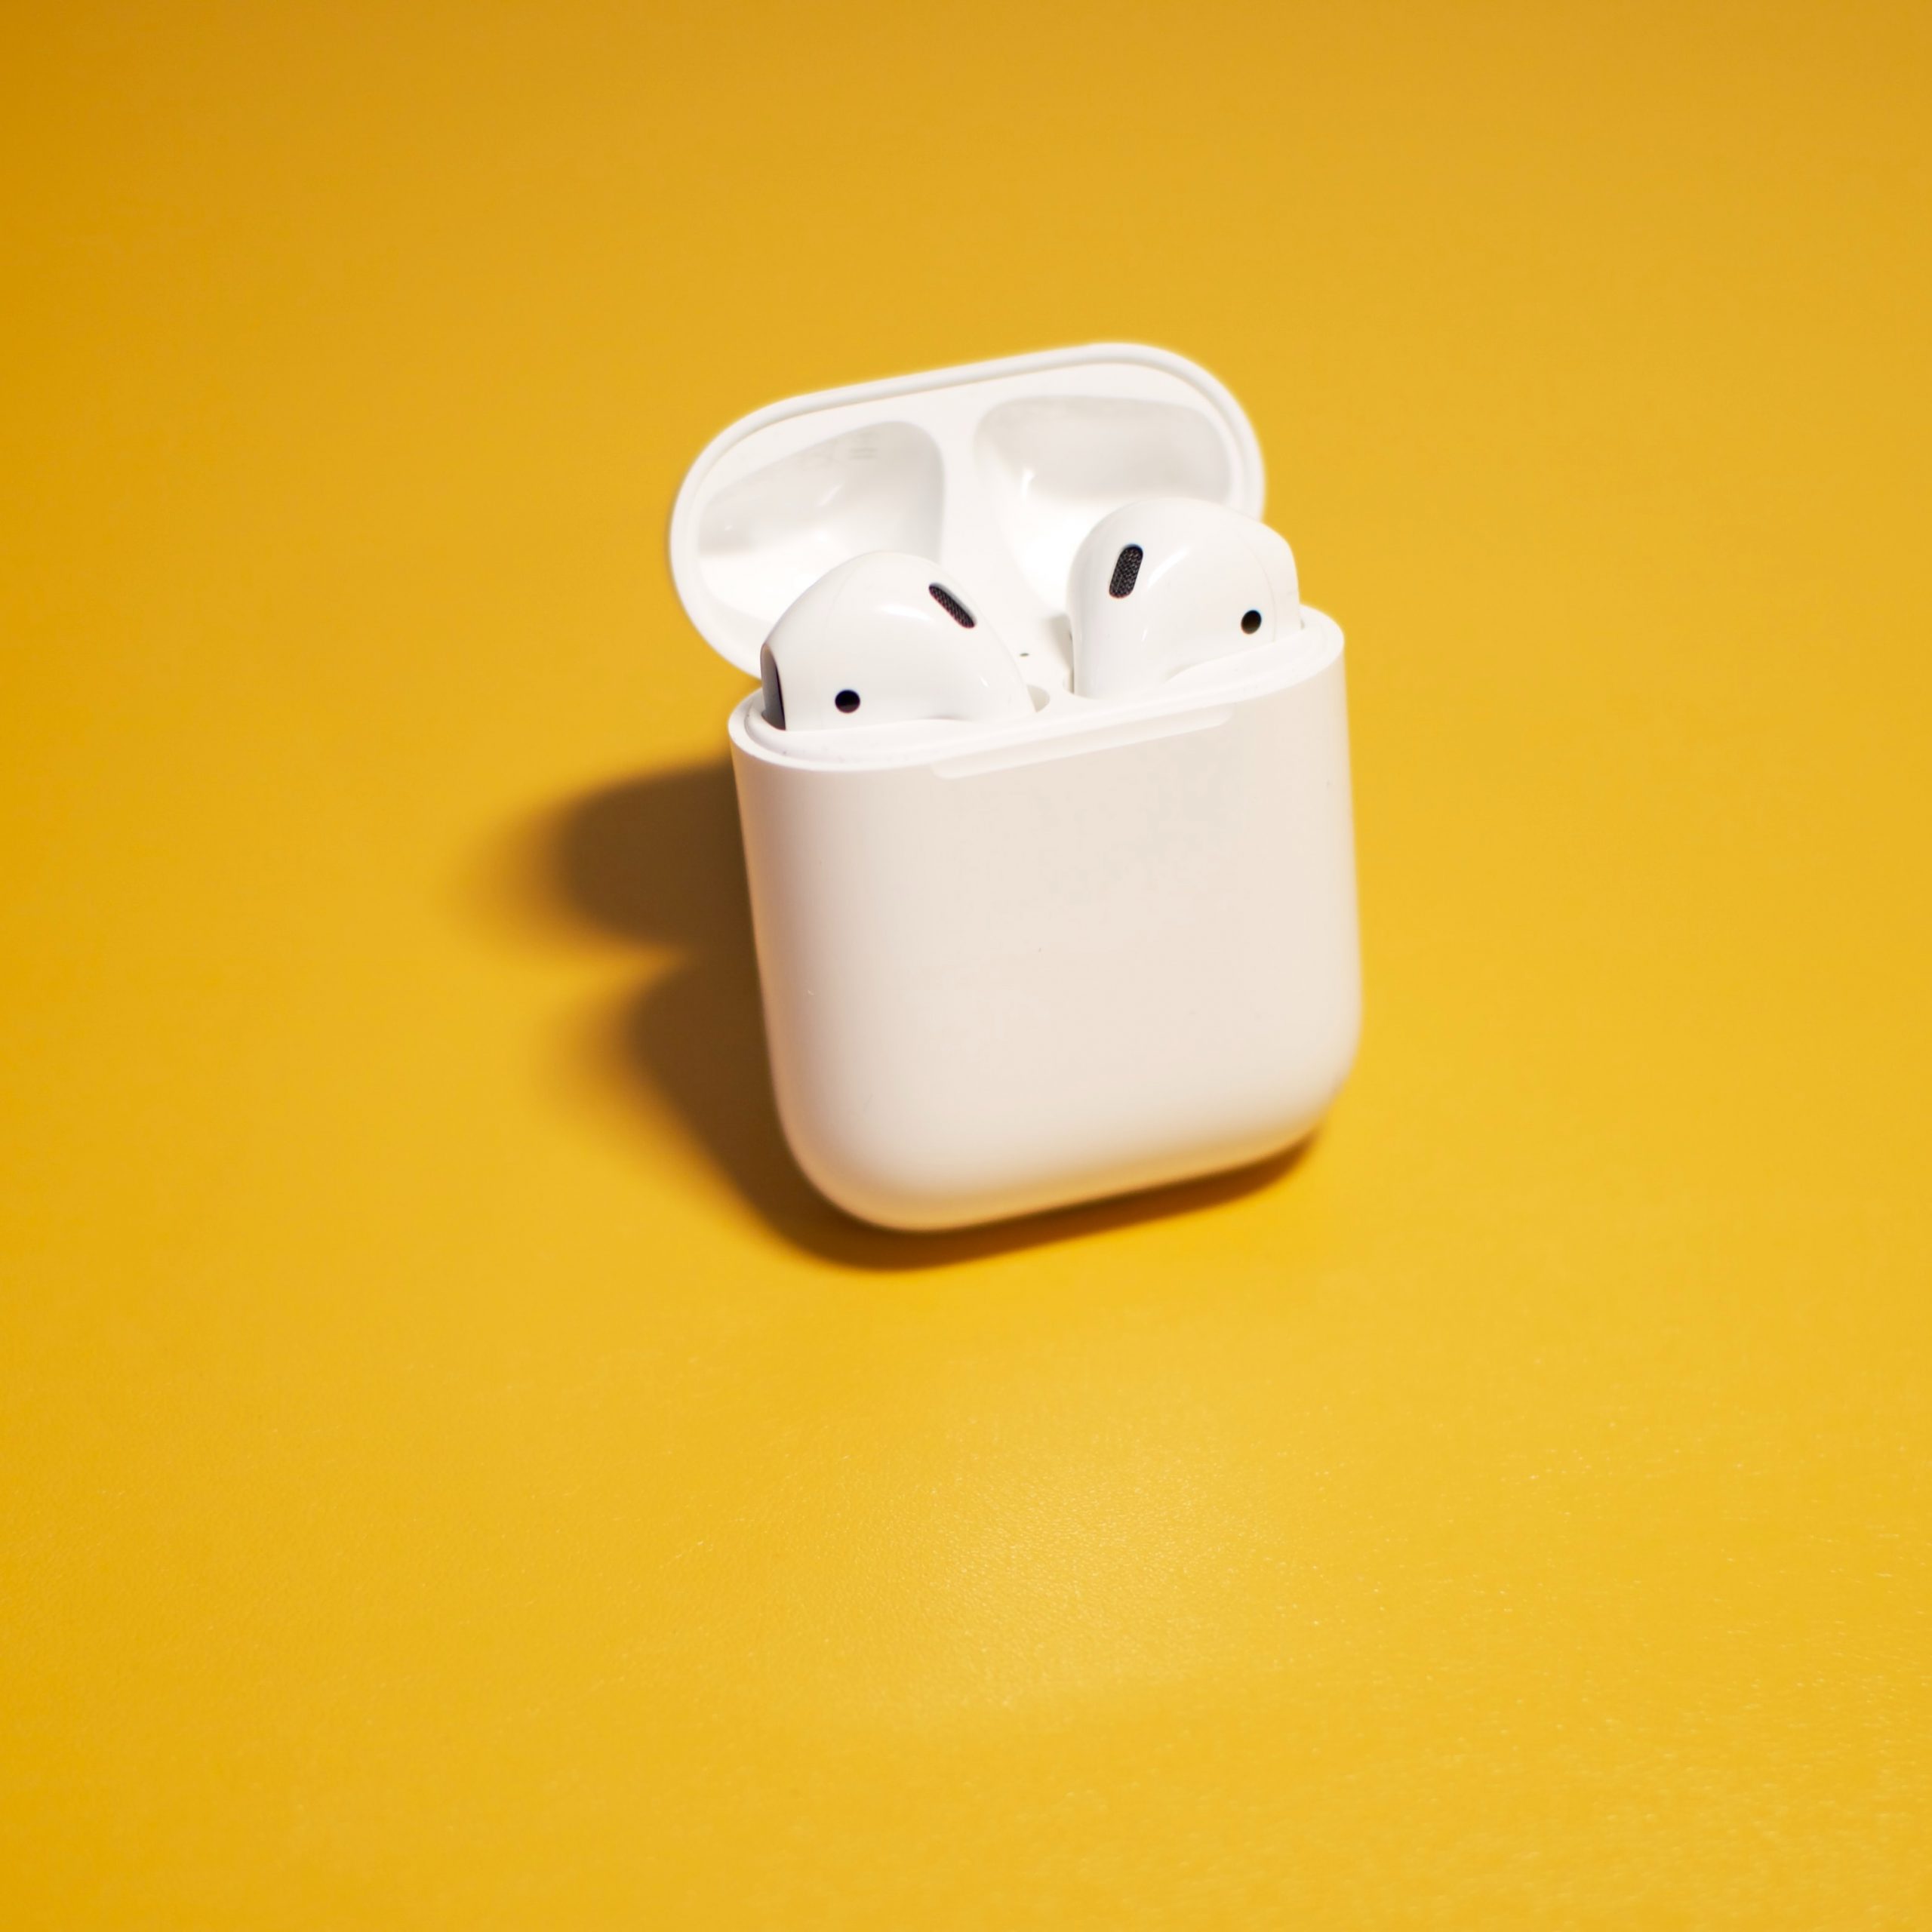 Apple's next-generation AirPods will be available soon. According to the latest rumors, Apple's next-generation AirPods will be available later